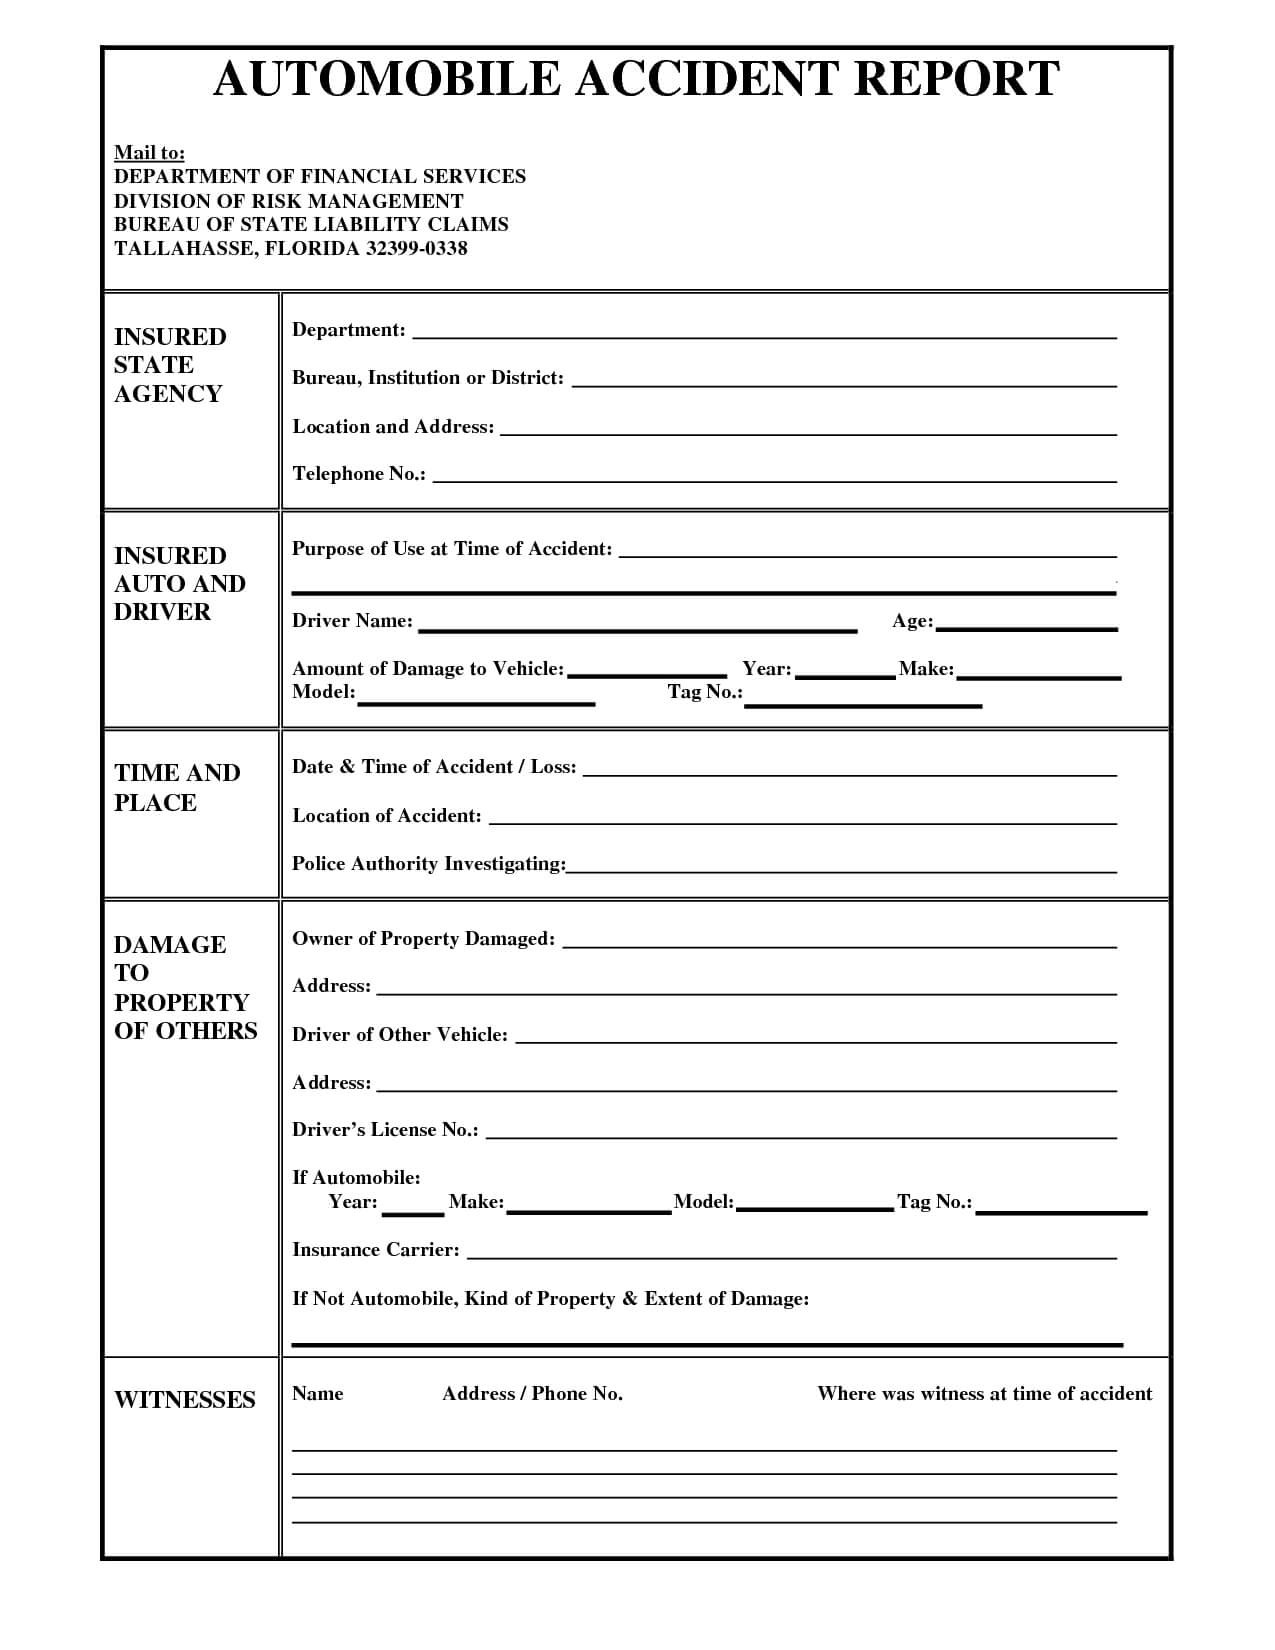 020 Vehicle Accident Report Form Template 504334 Car Regarding Motor Vehicle Accident Report Form Template